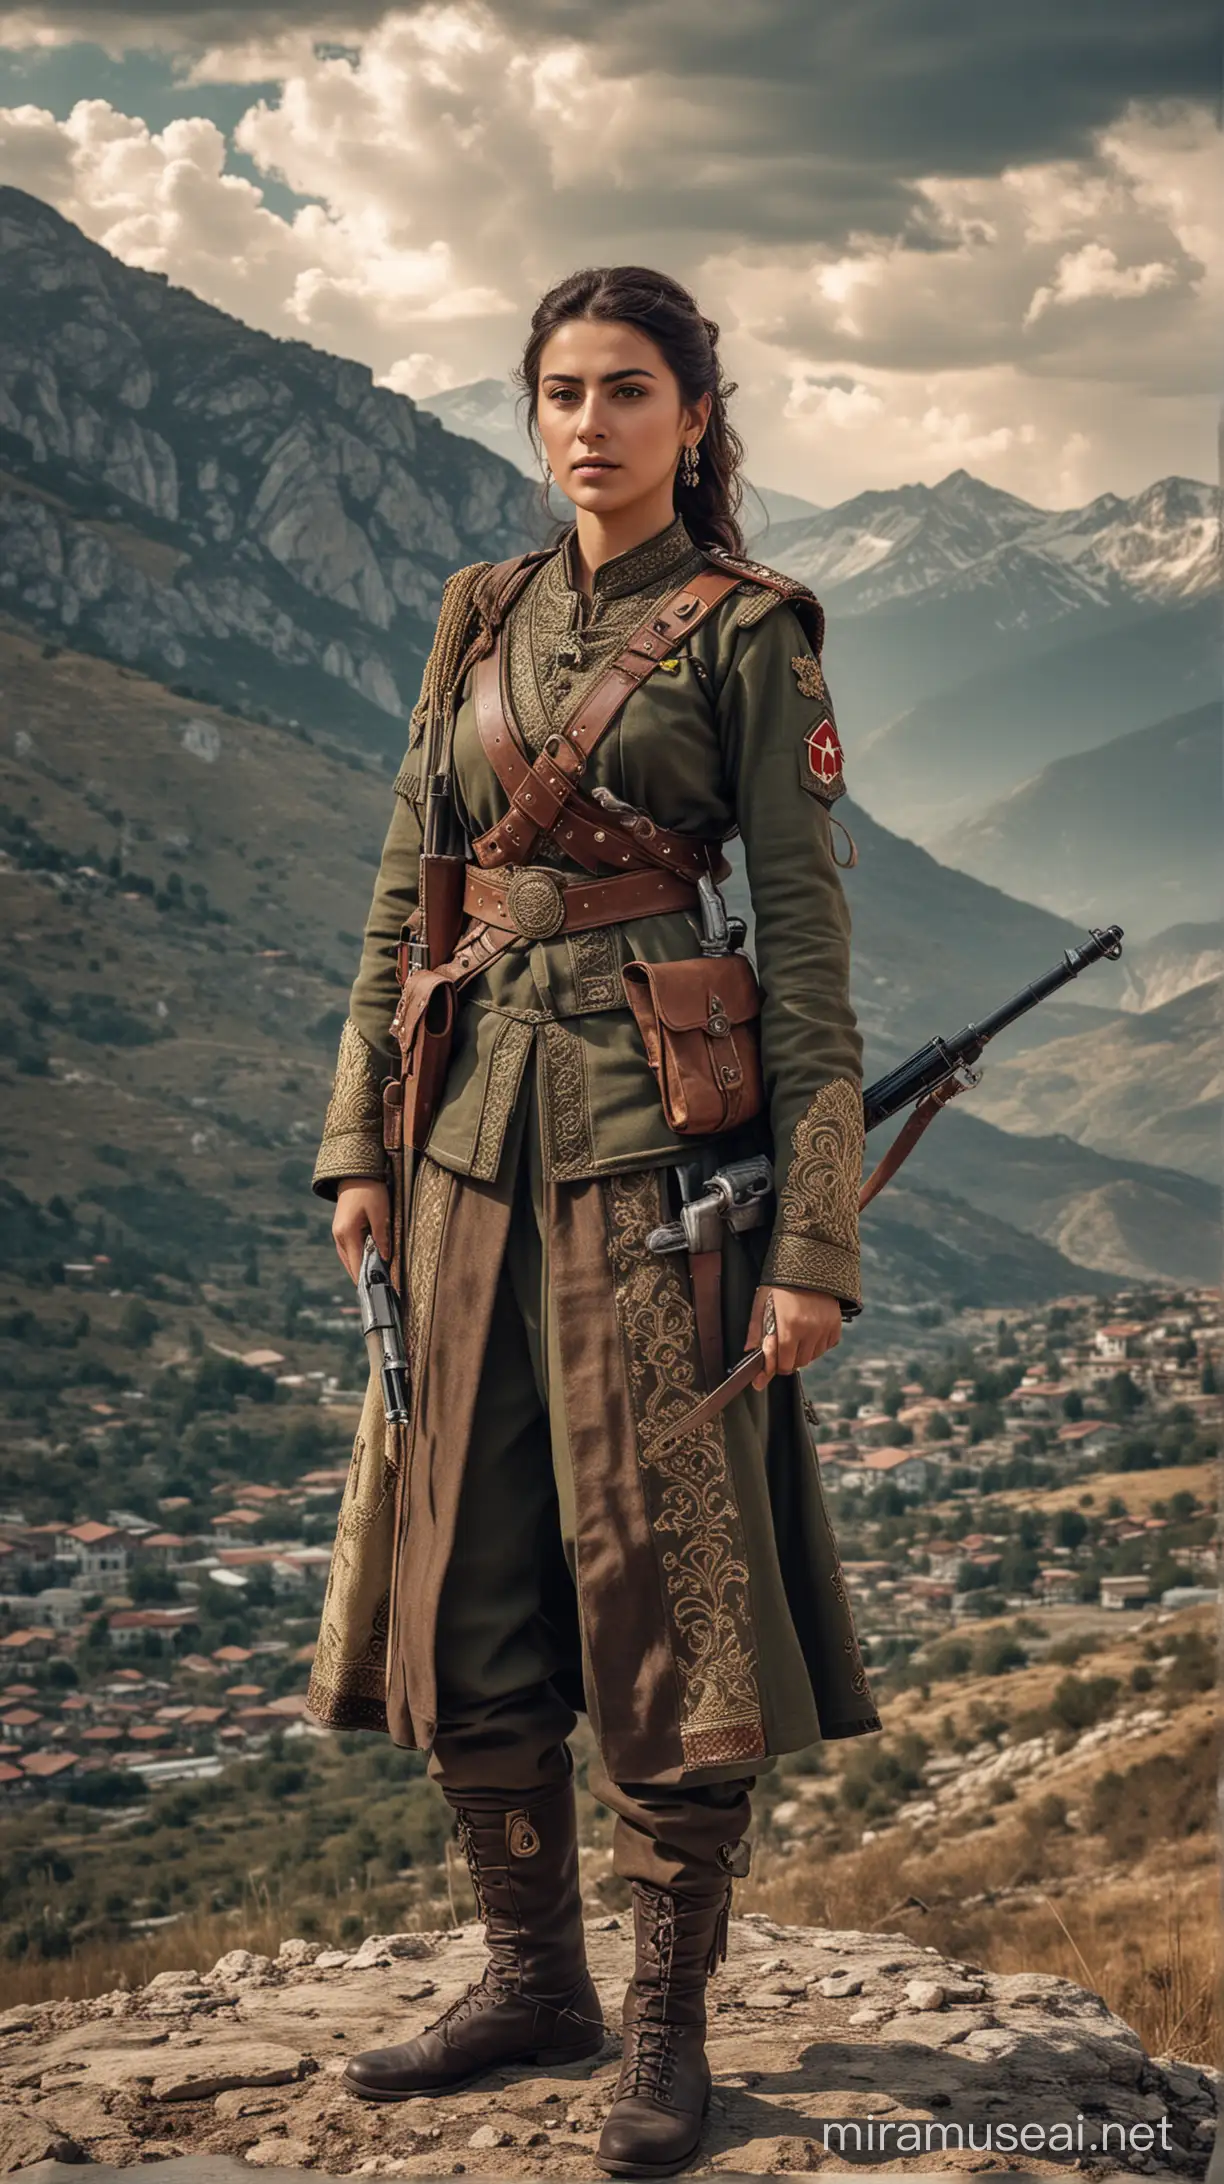 Depict a scene where Çete Emir Ayşe stands ready in her efe attire, holding her weapon, with mountains in the background, clouds in the sky, and a serene natural atmosphere surrounding her. old turkish soldier dressed


